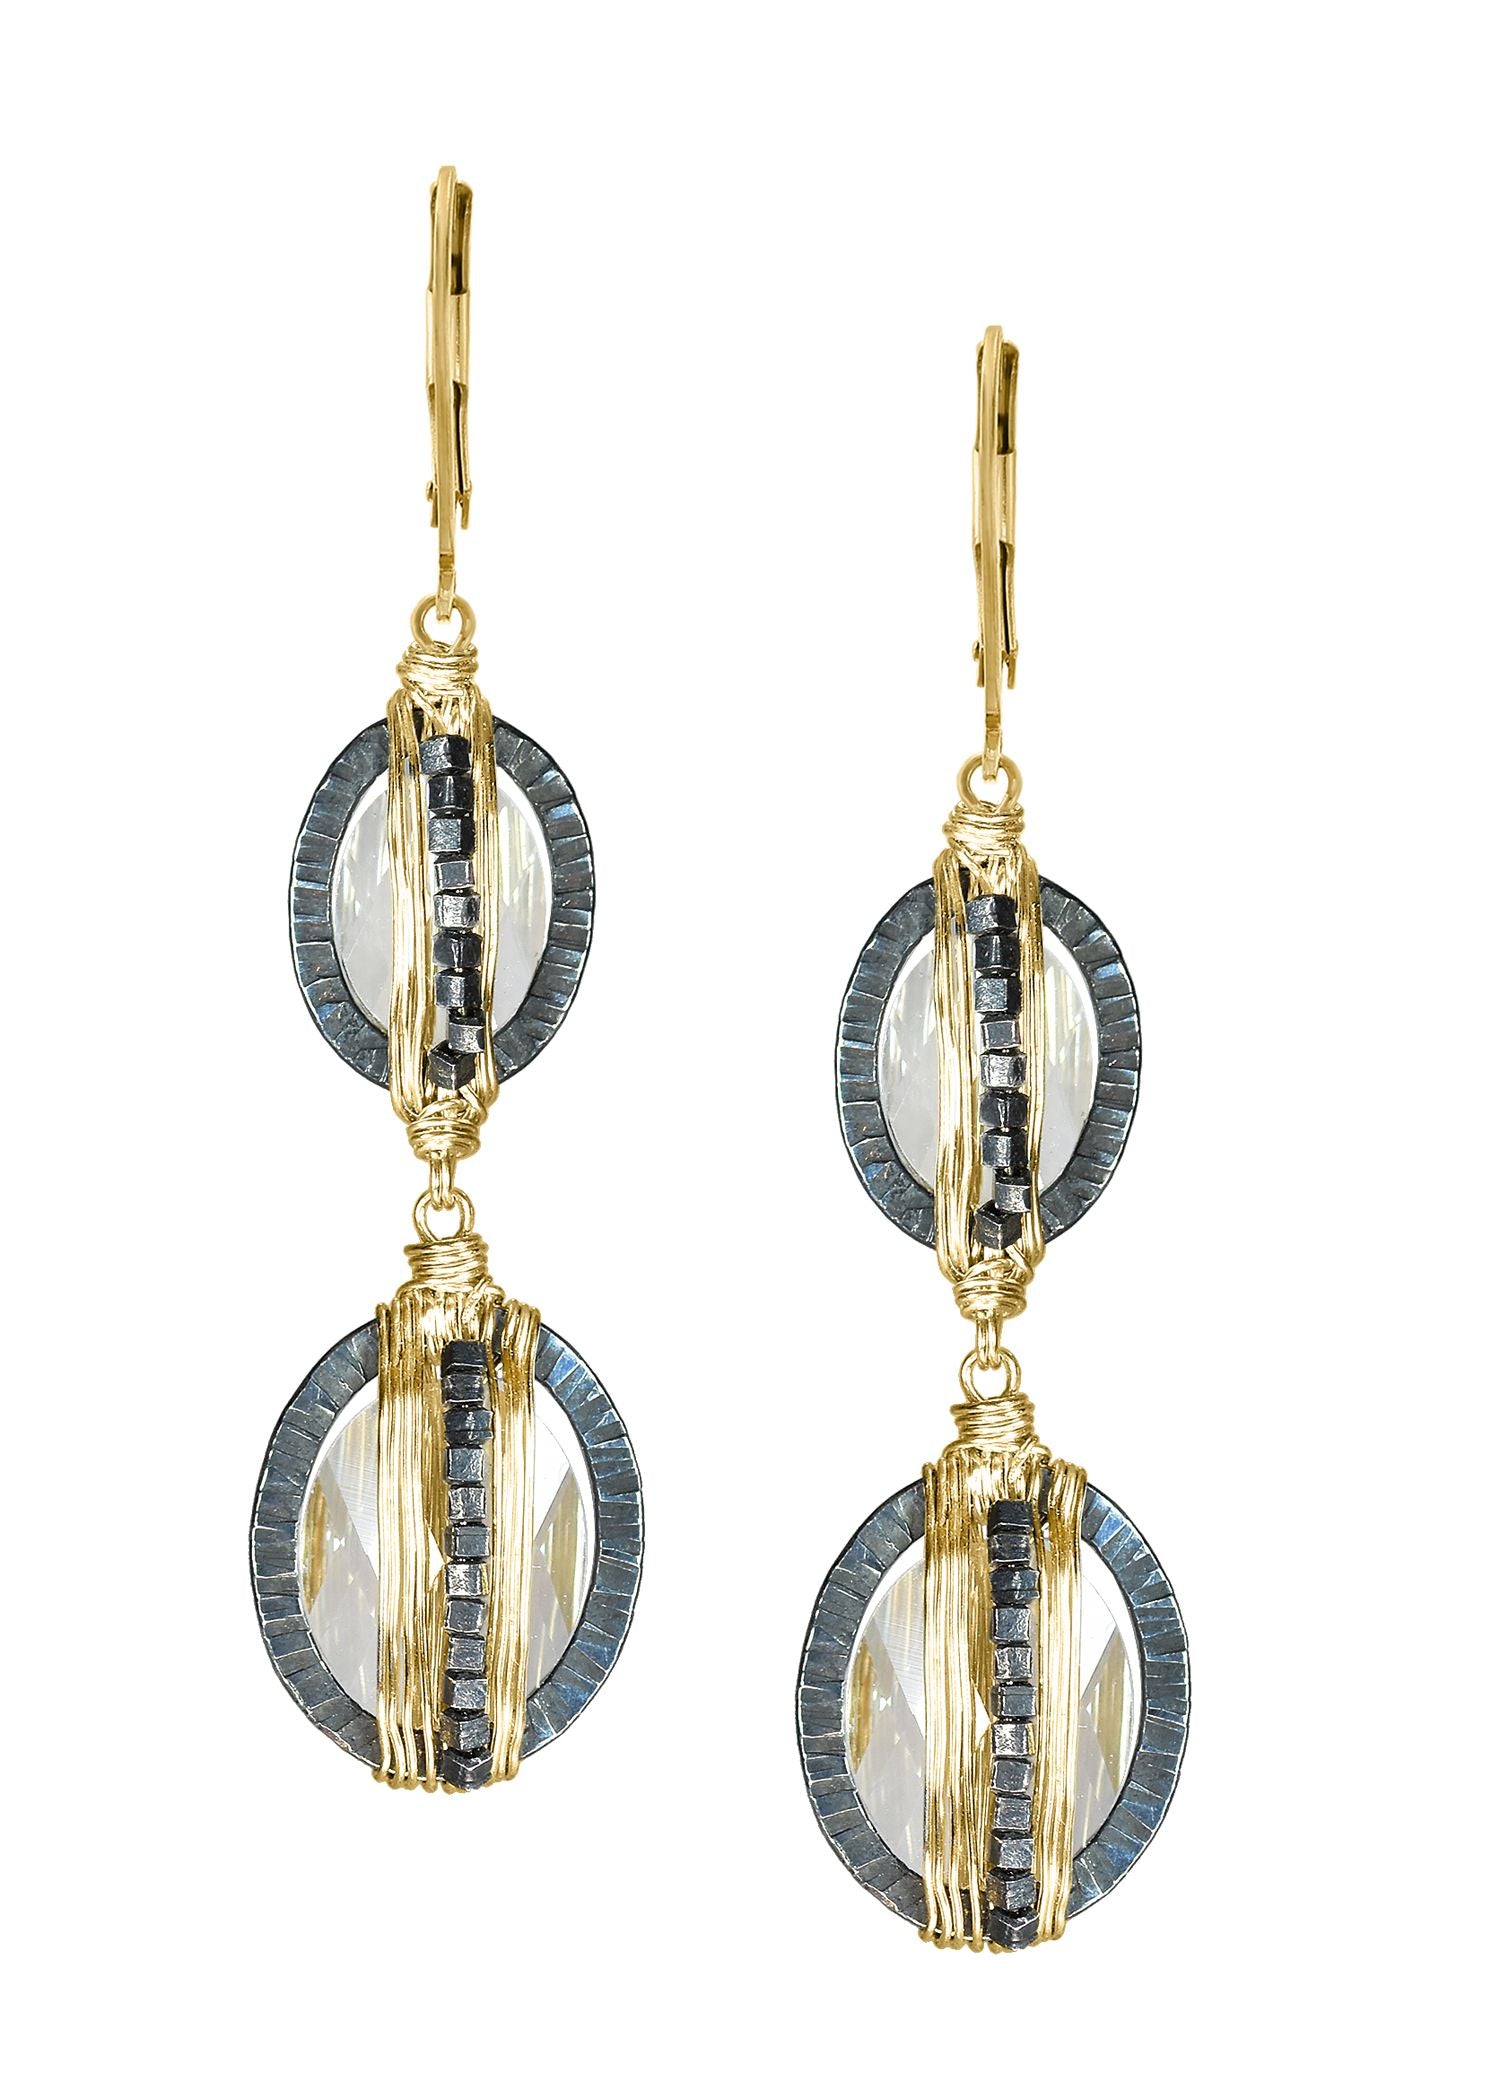 Crystal 14k gold fill Blackened sterling silver Mixed metal Earrings measure 1-7/8" in length (including the levers) and 7/16" in width Handmade in our Los Angeles studio